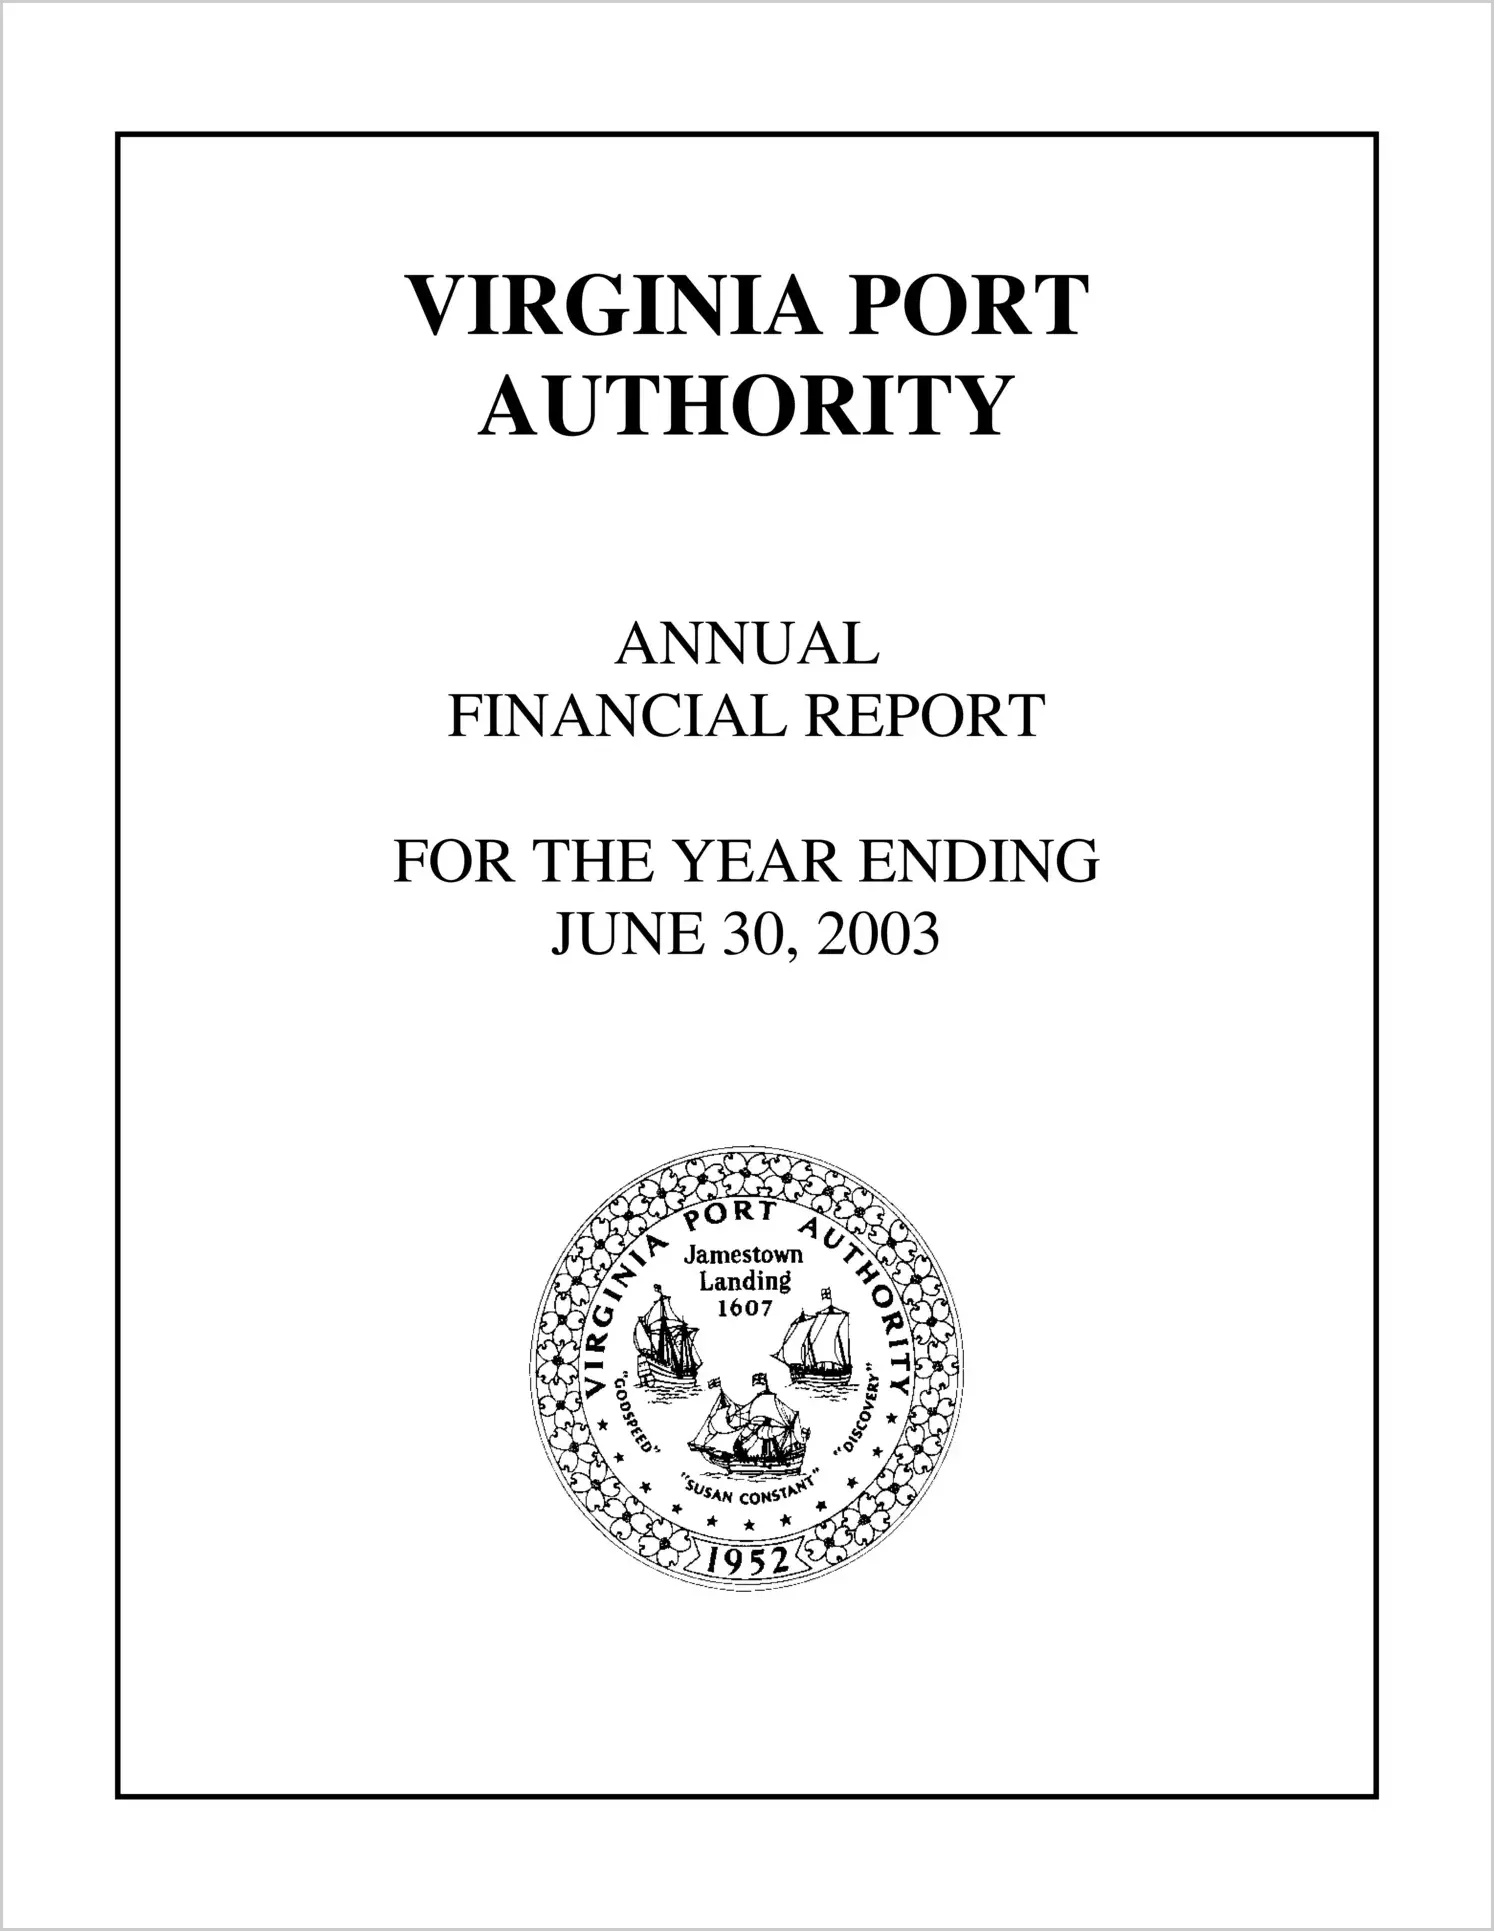 Virginia Port Authority Annual Financial Report for the year ending June 30, 2003